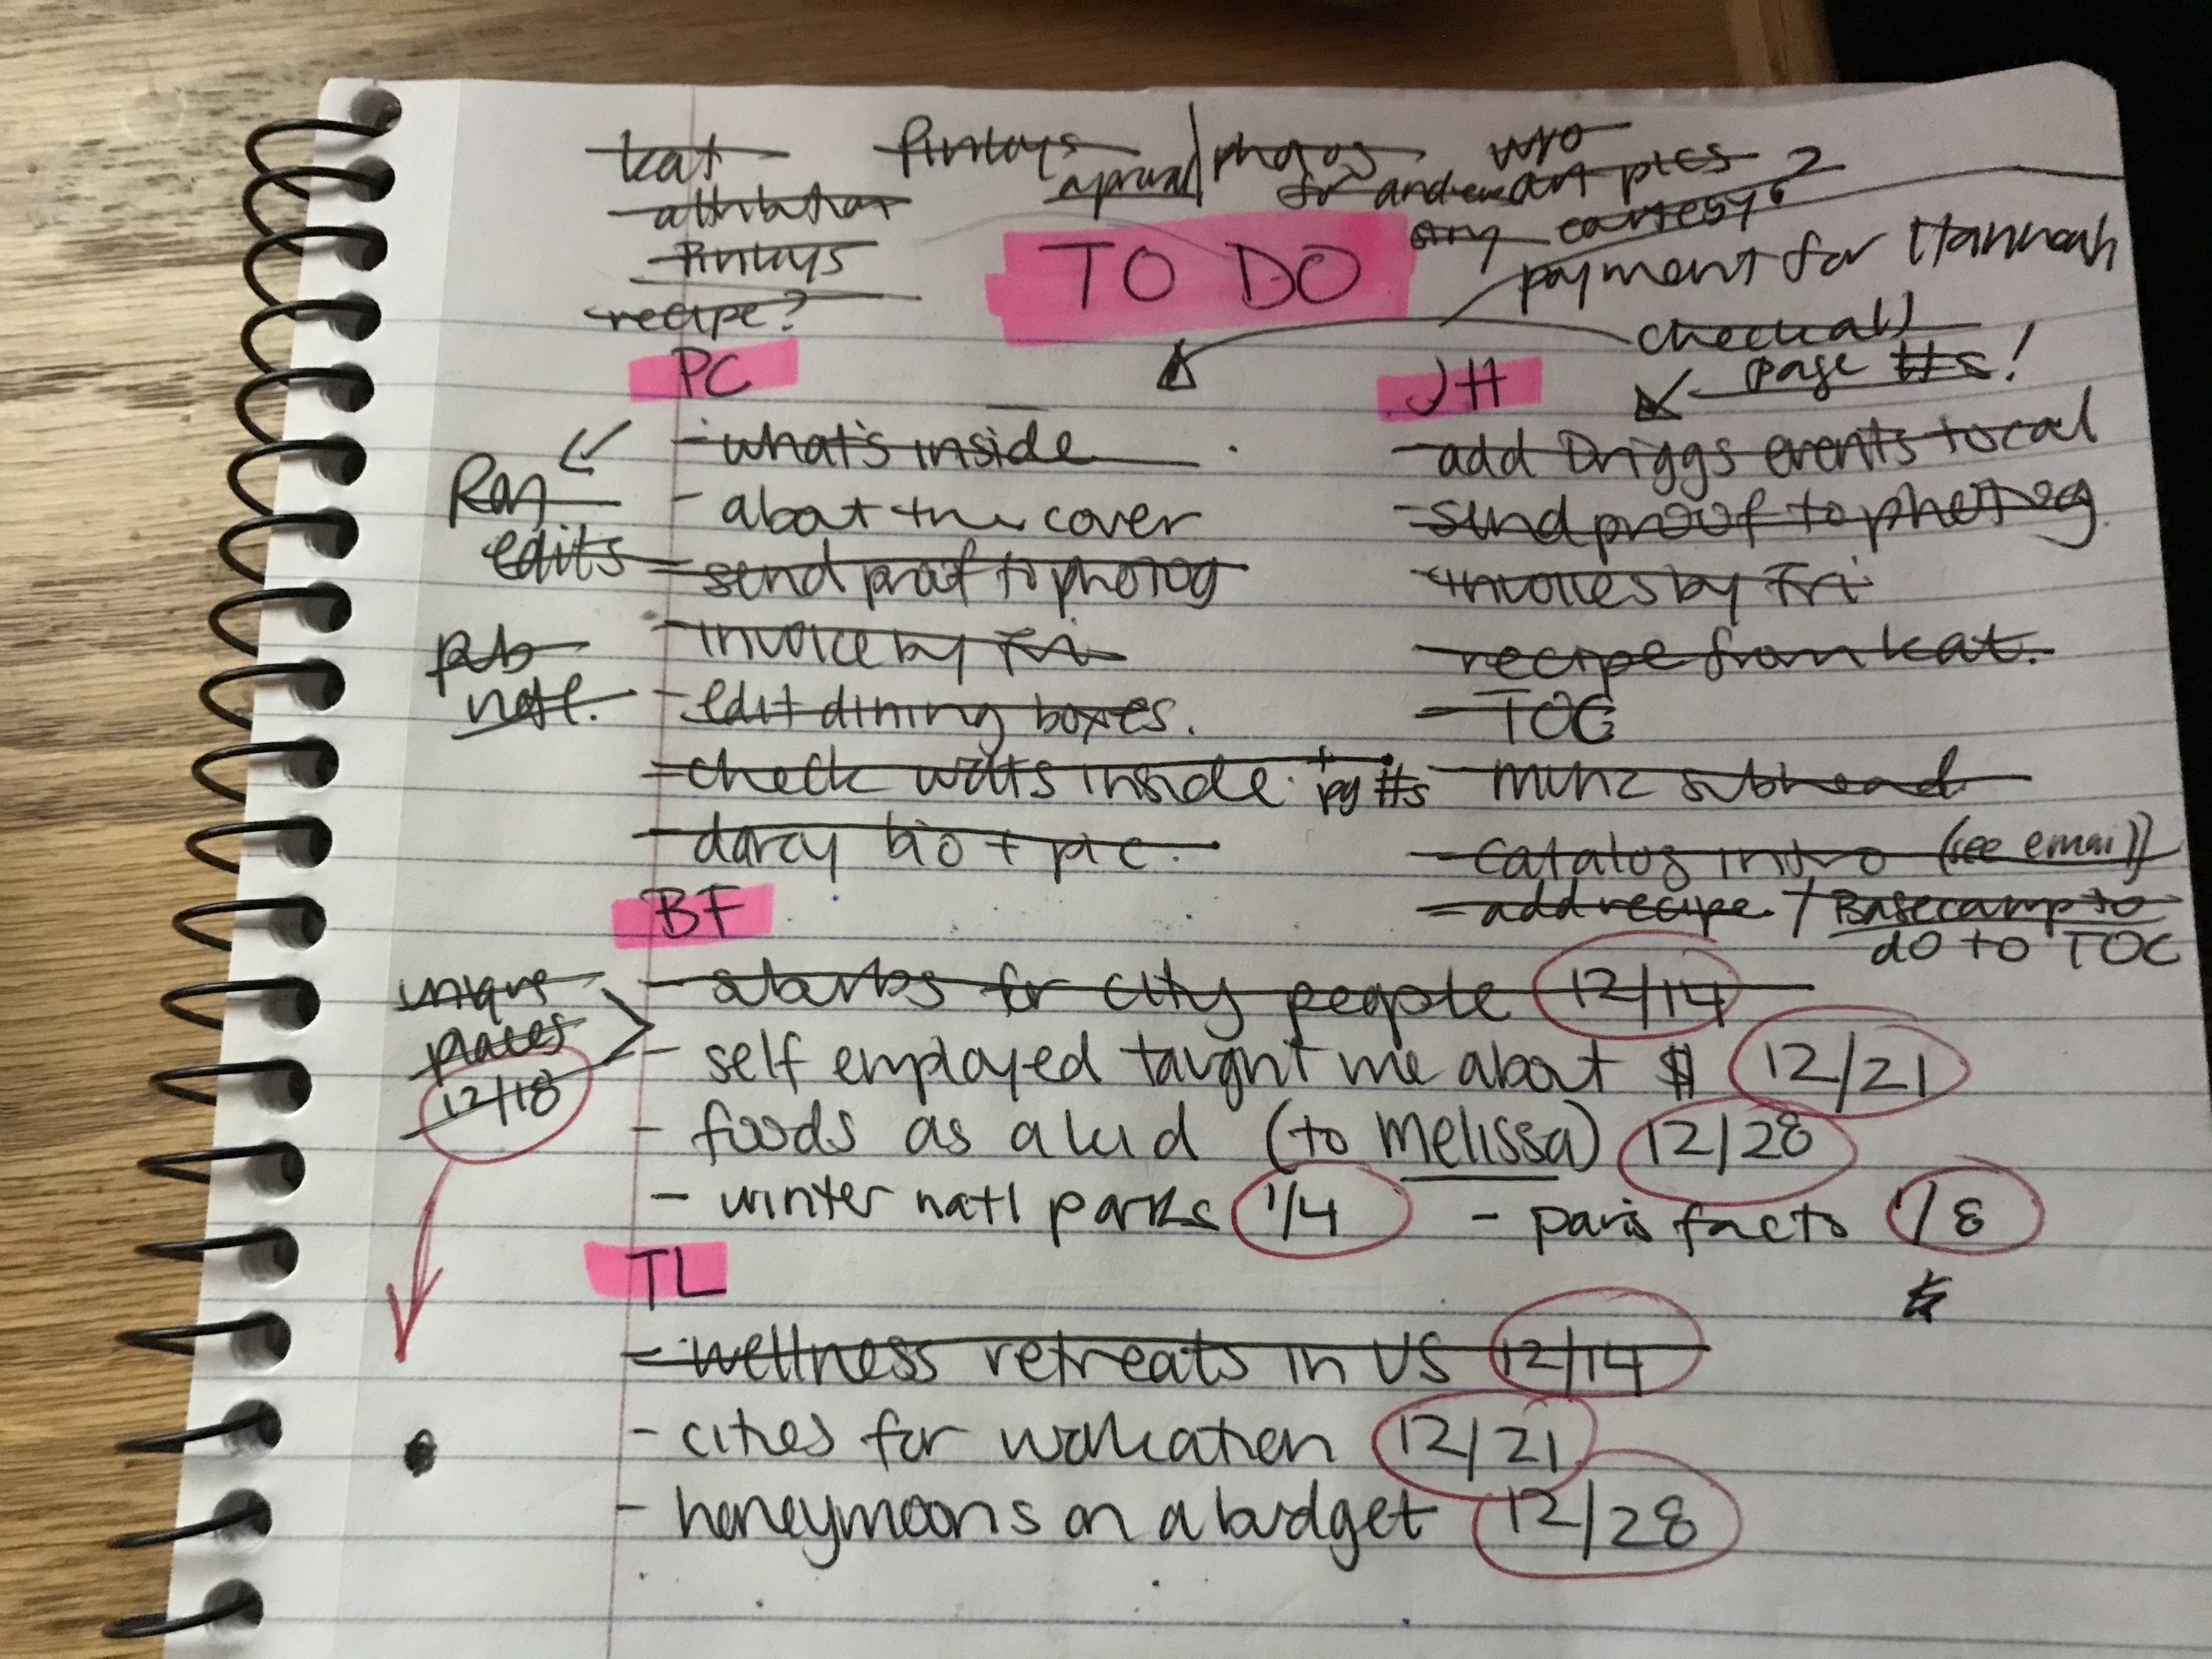 Notepad of to-dos